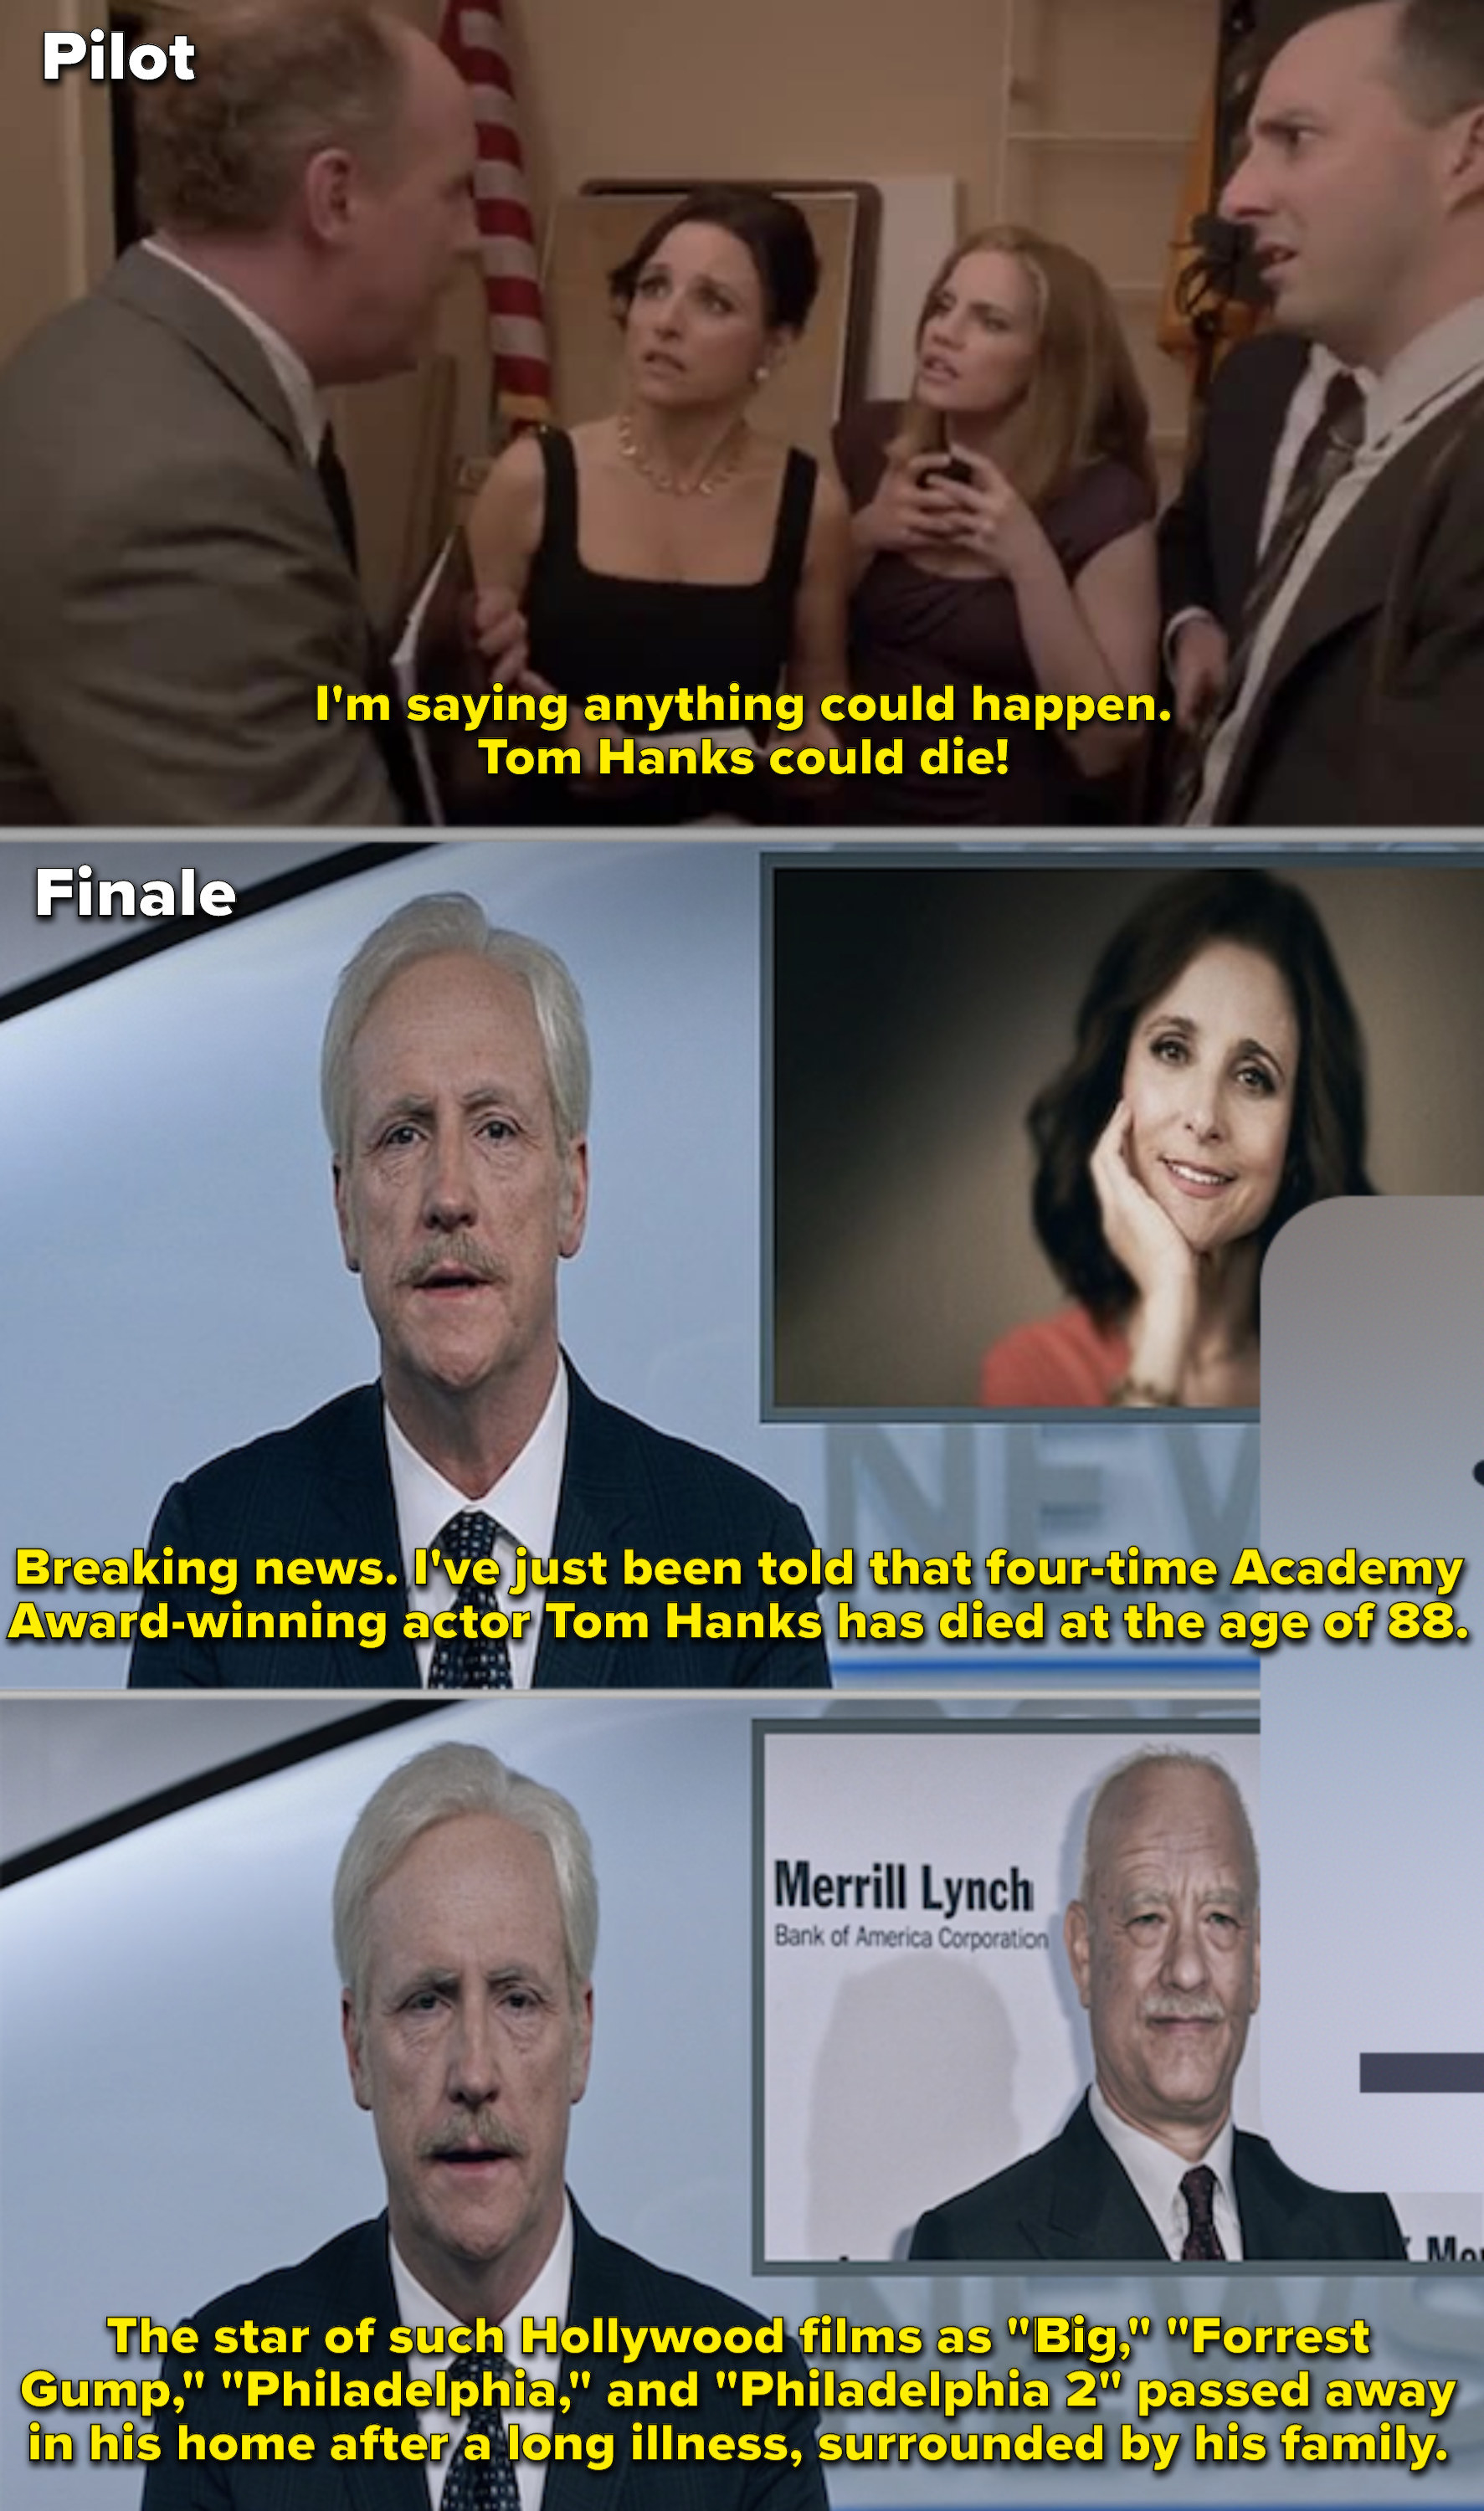 Mike announcing during the news that Tom Hanks has died